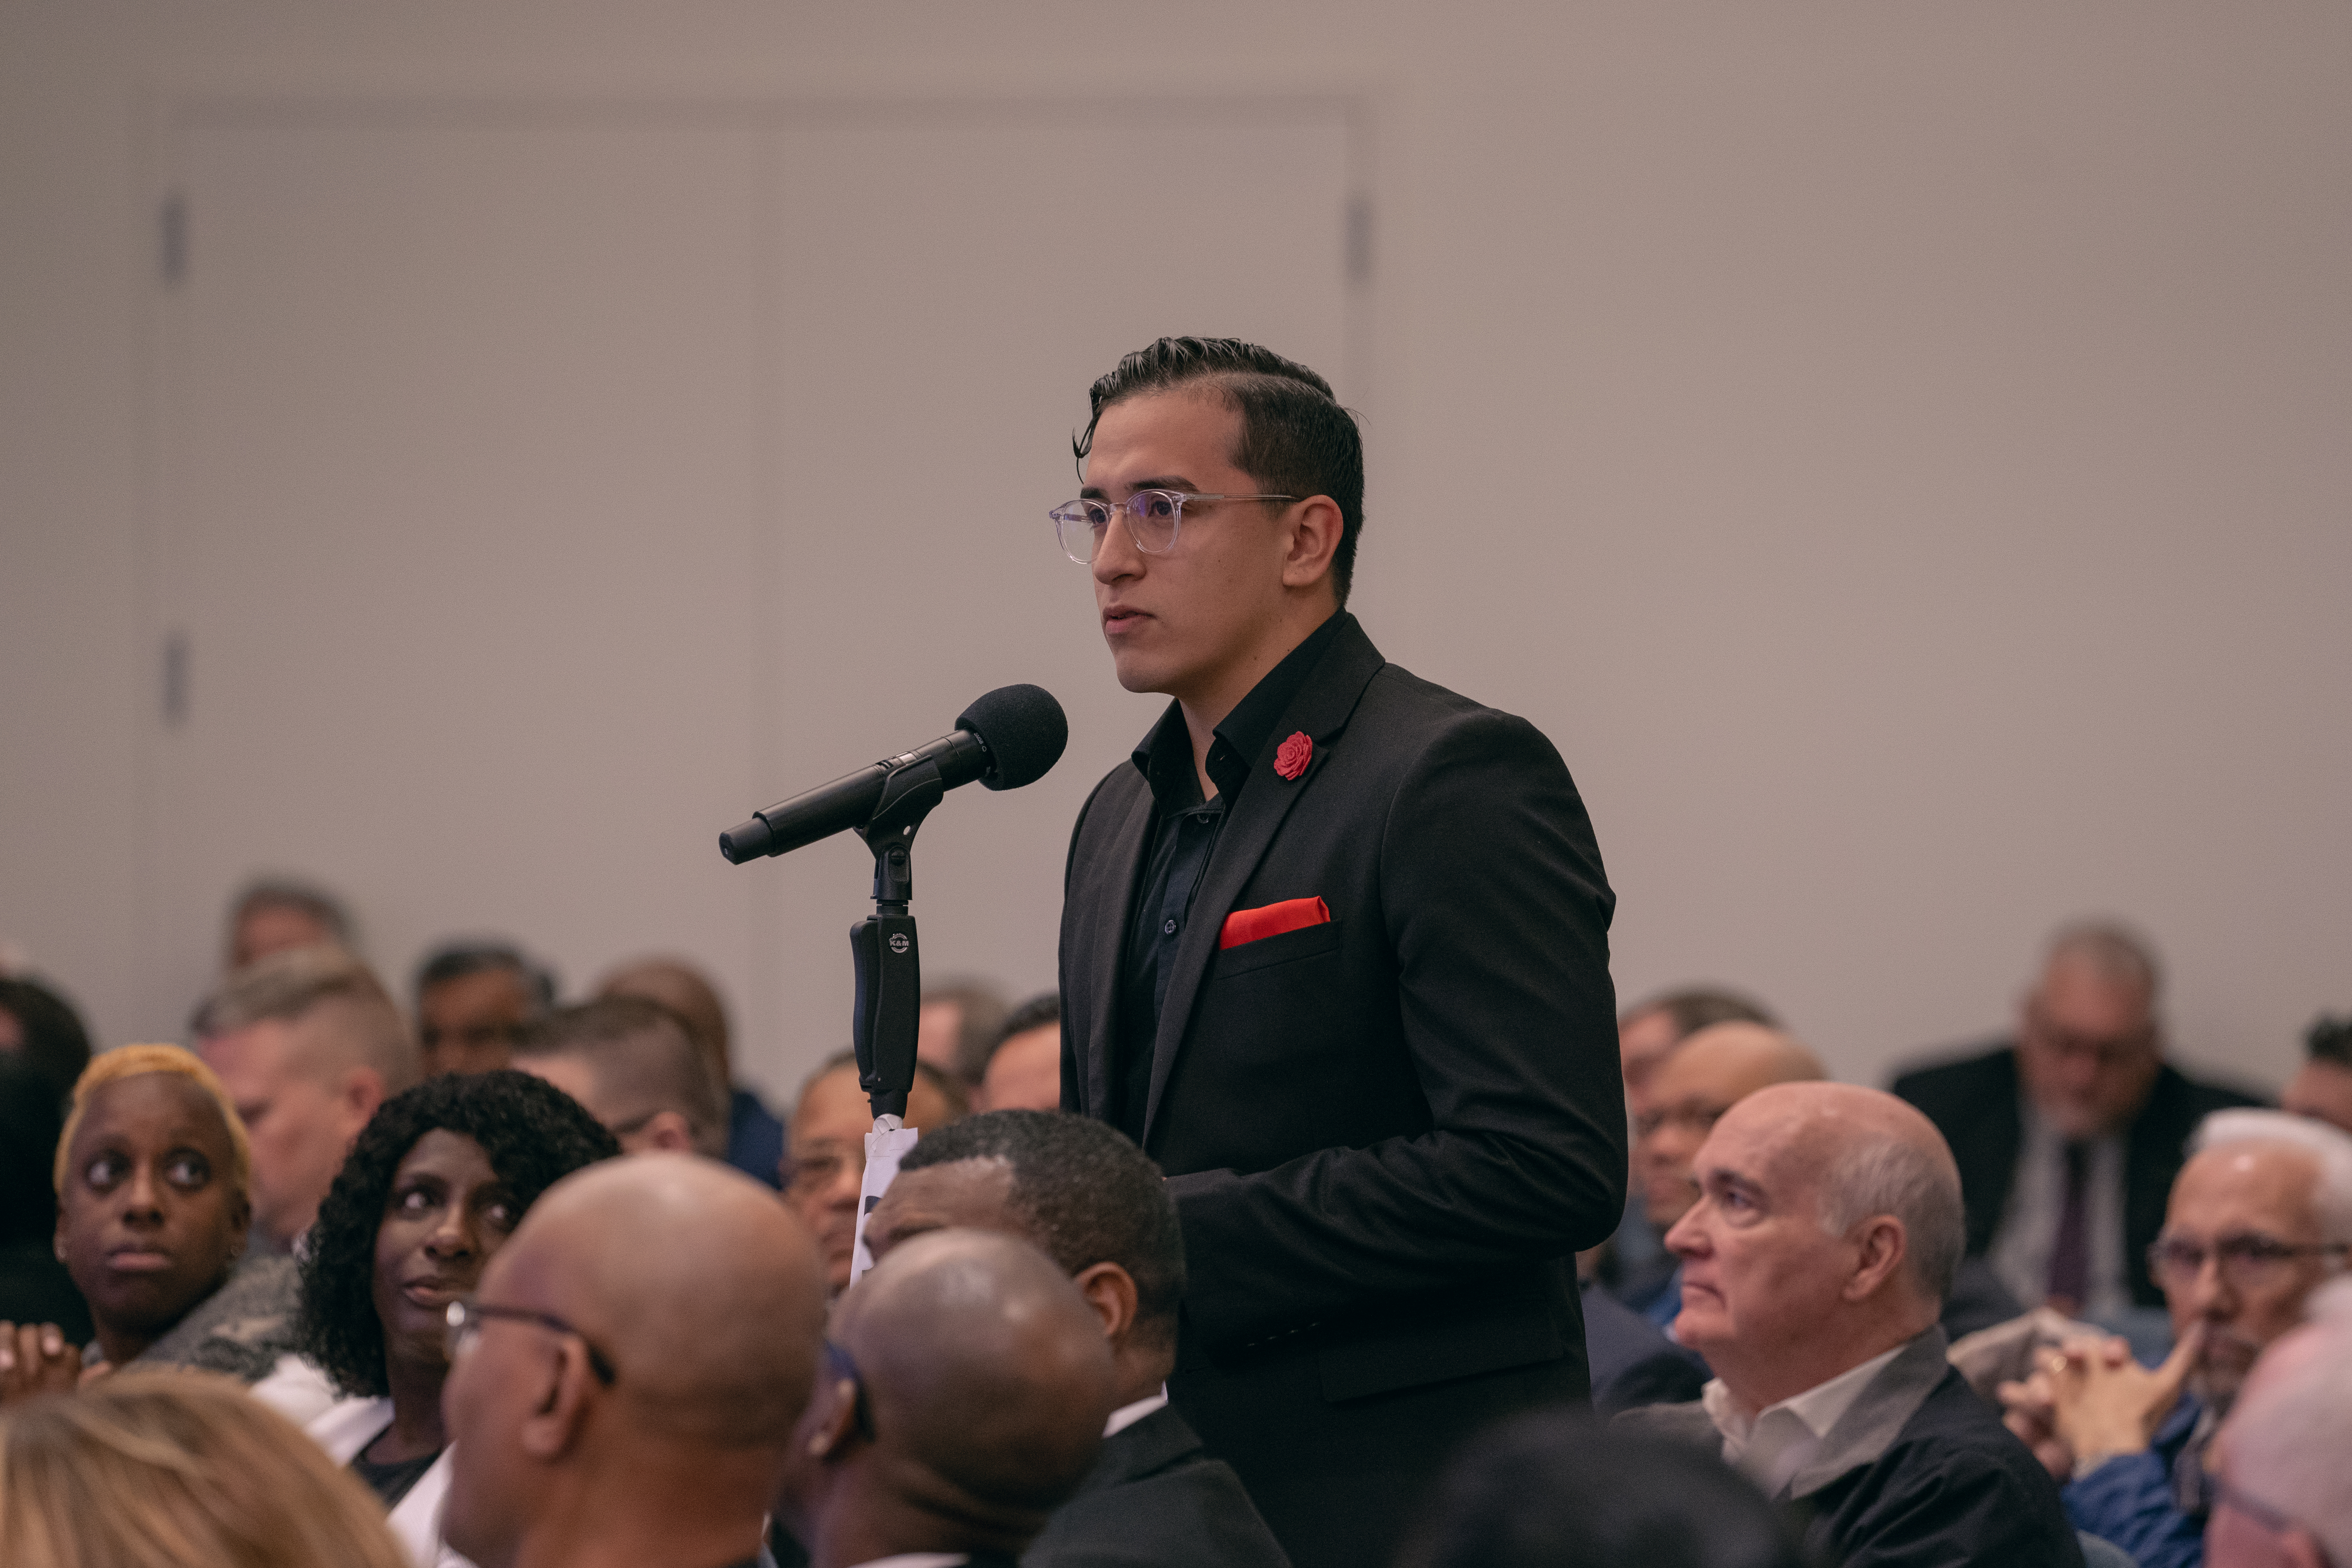 After hearing the Adventist Media Ministries report, Mark Galvez, a student delegate from Southern Adventist University, advocates for sponsorships of young adult-produced podcasts.